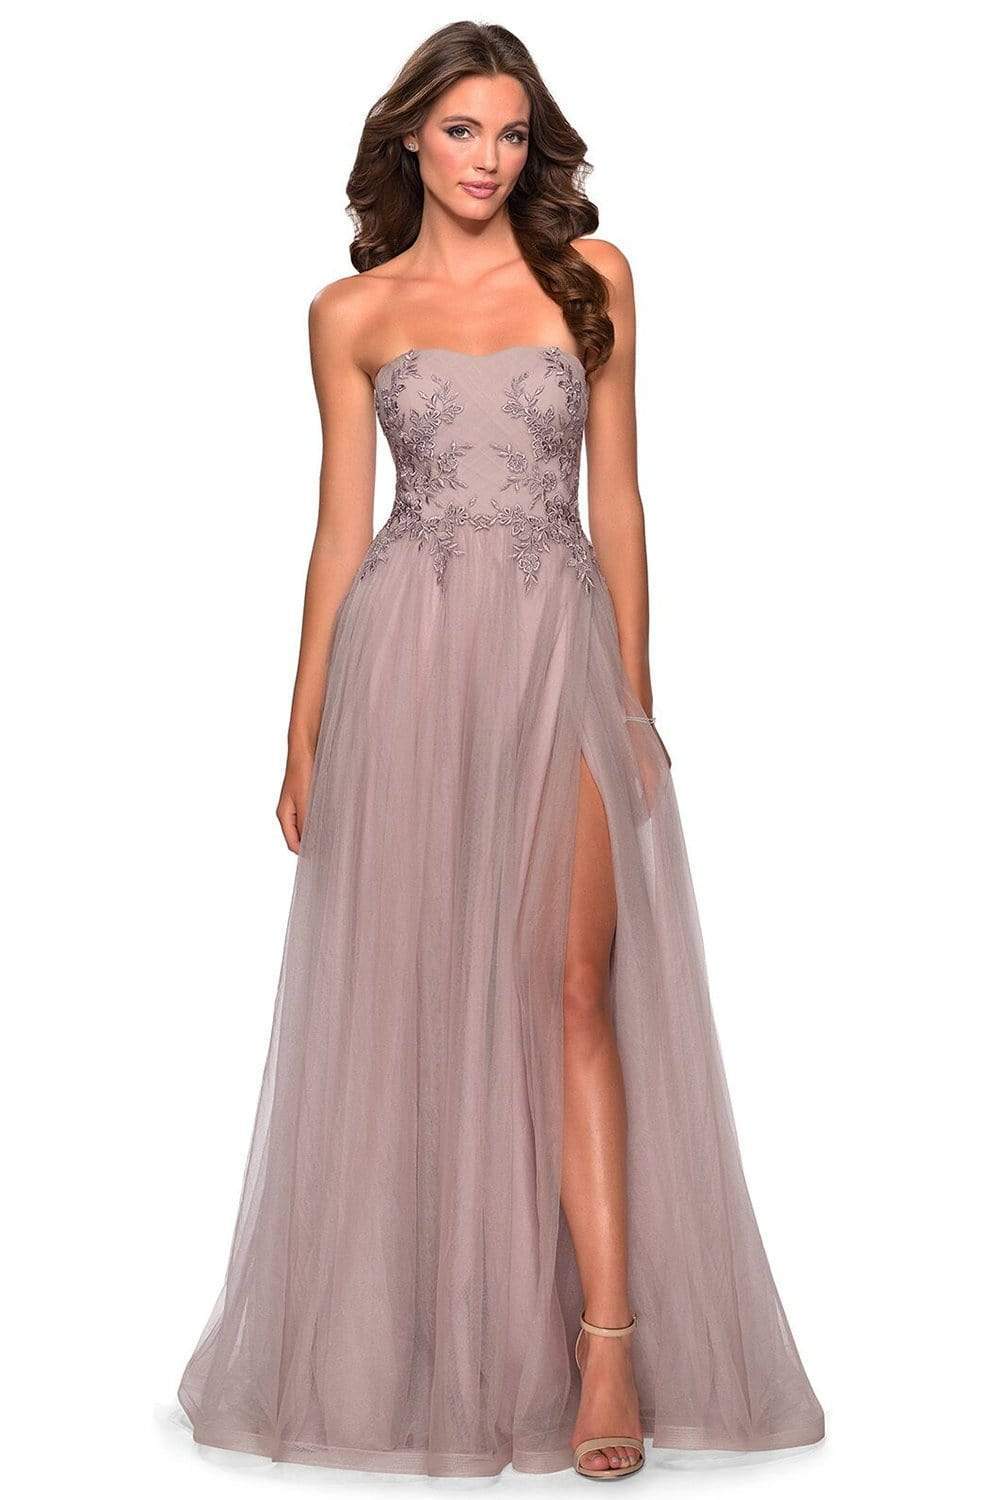 La Femme - Fitted Embroidered Tulle Sweetheart Evening Gown 28586SC In Pink